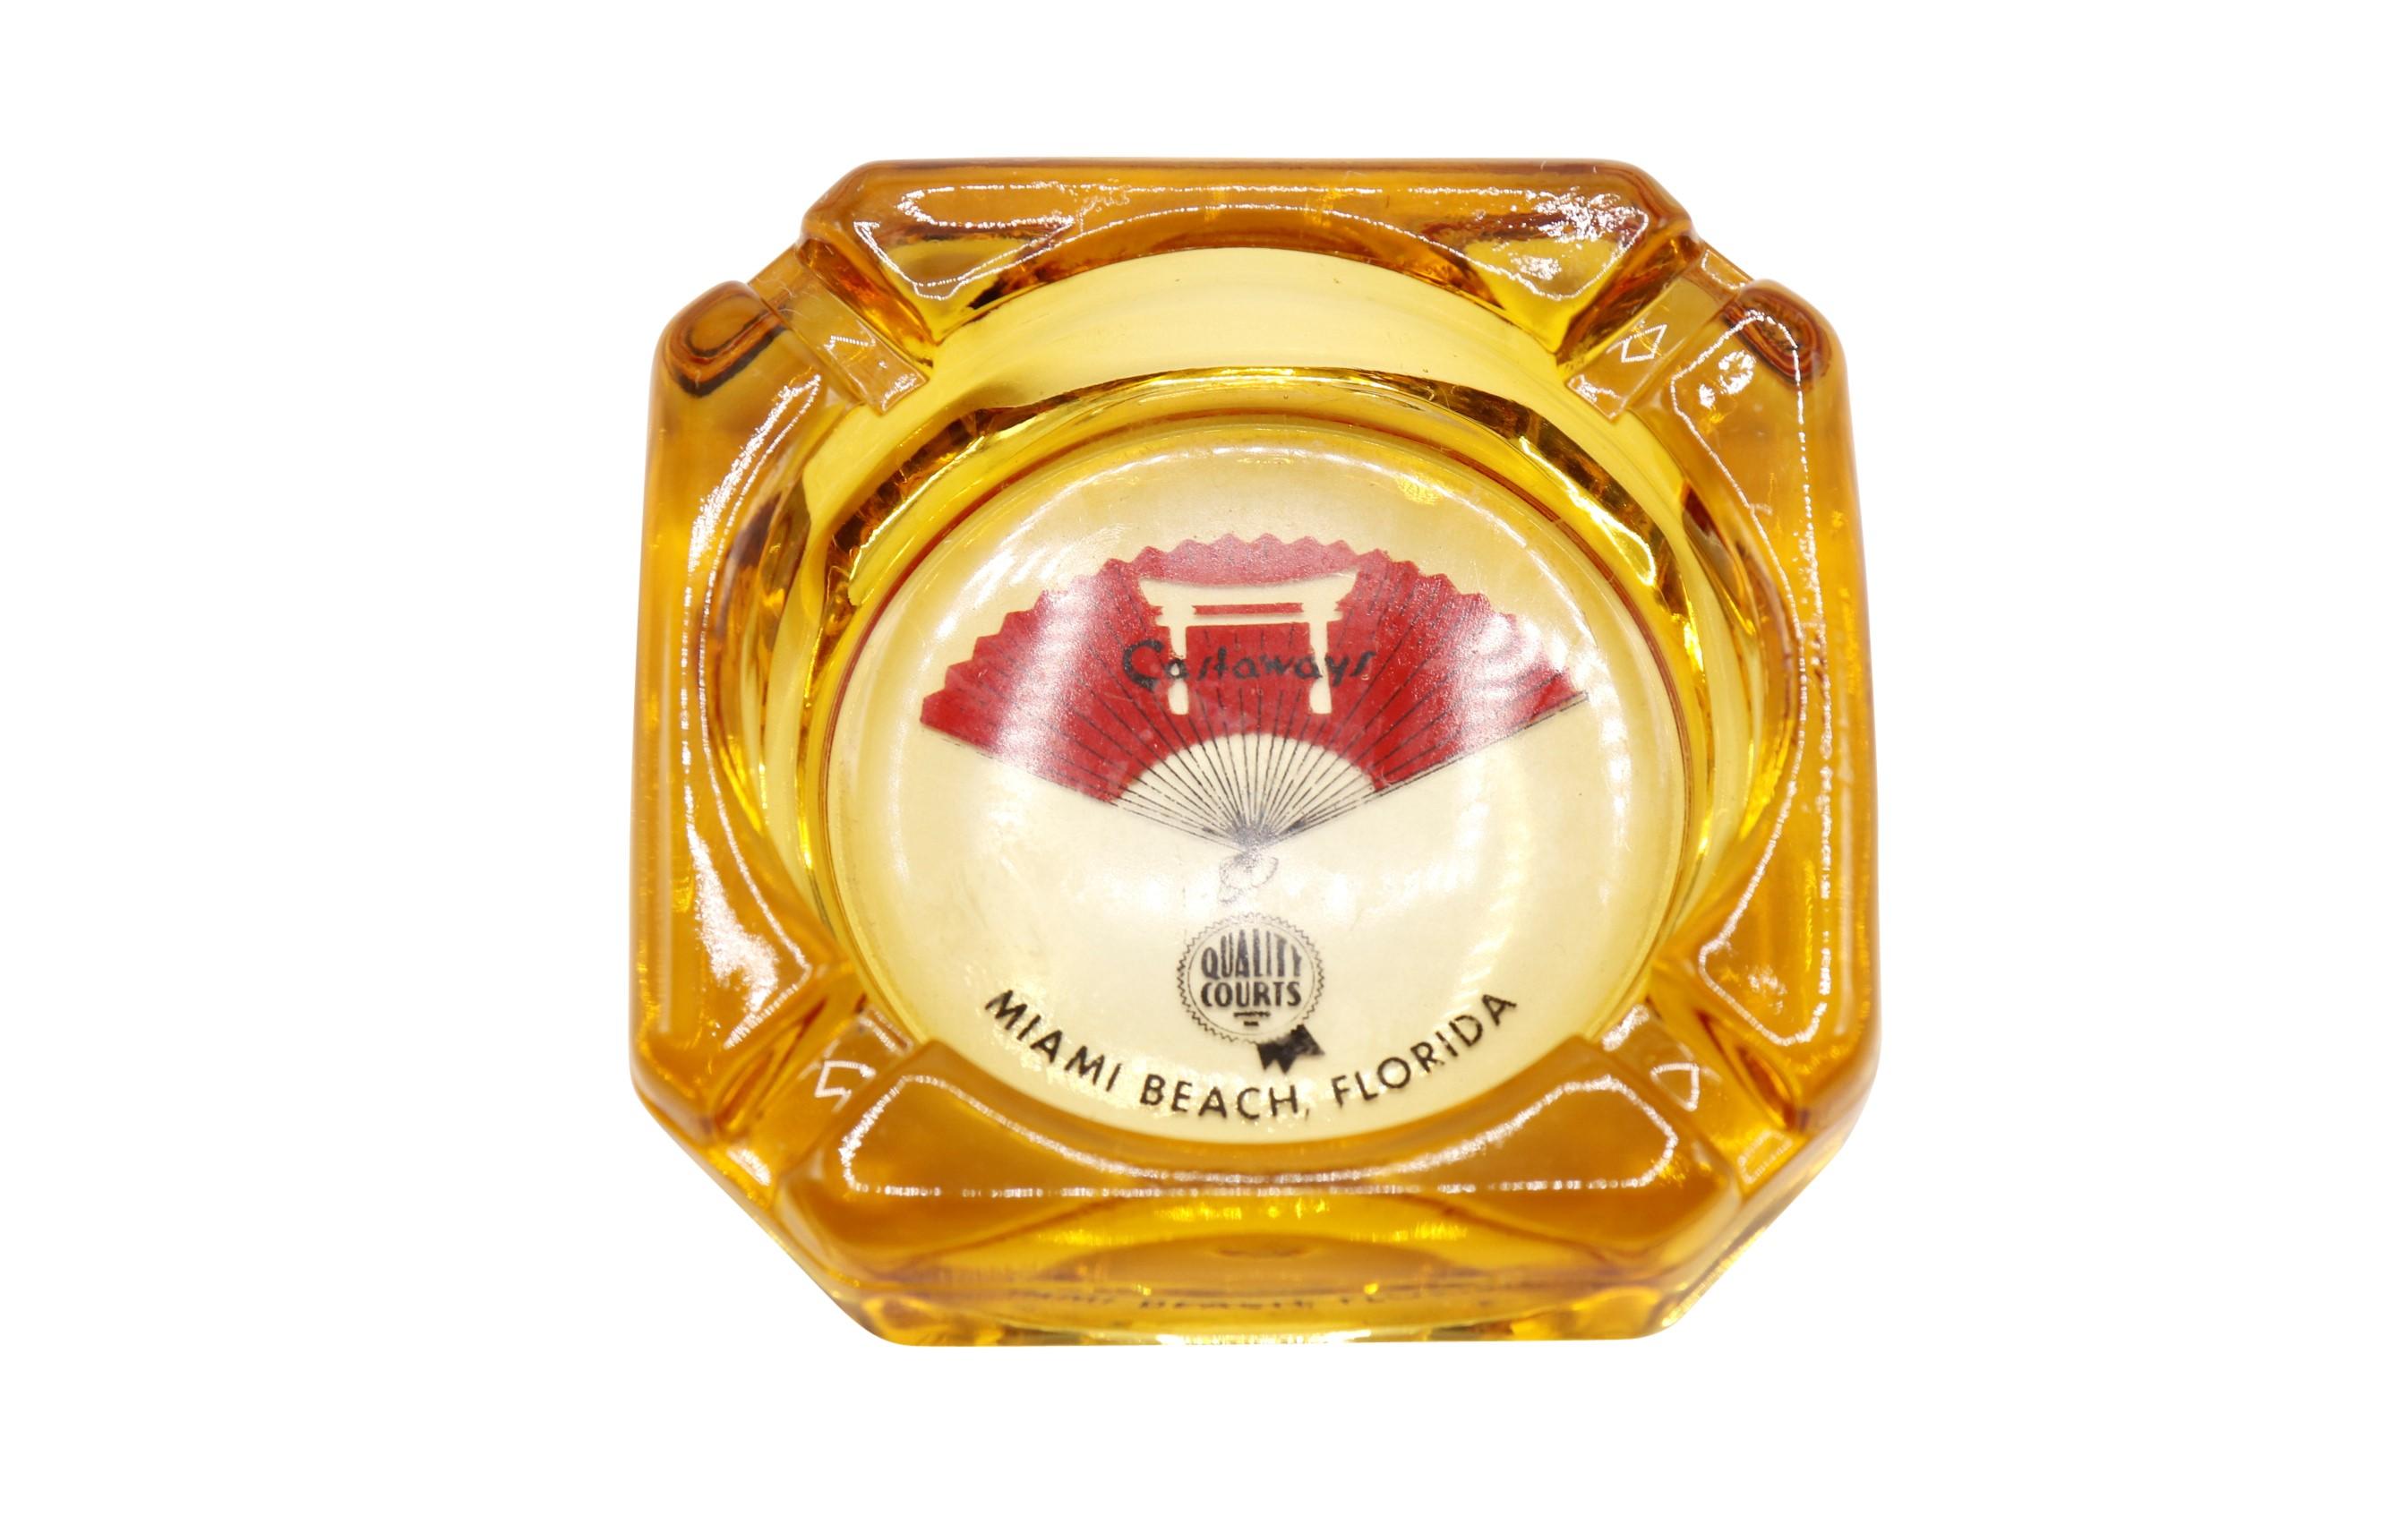 A pair of yellow glass ashtrays from The Castaways Hotel of Miami Beach, Florida. The center is printed with their logo and reads “Castaways, Quality Courts, Miami Beach Florida”. Dimensions per ashtray.
